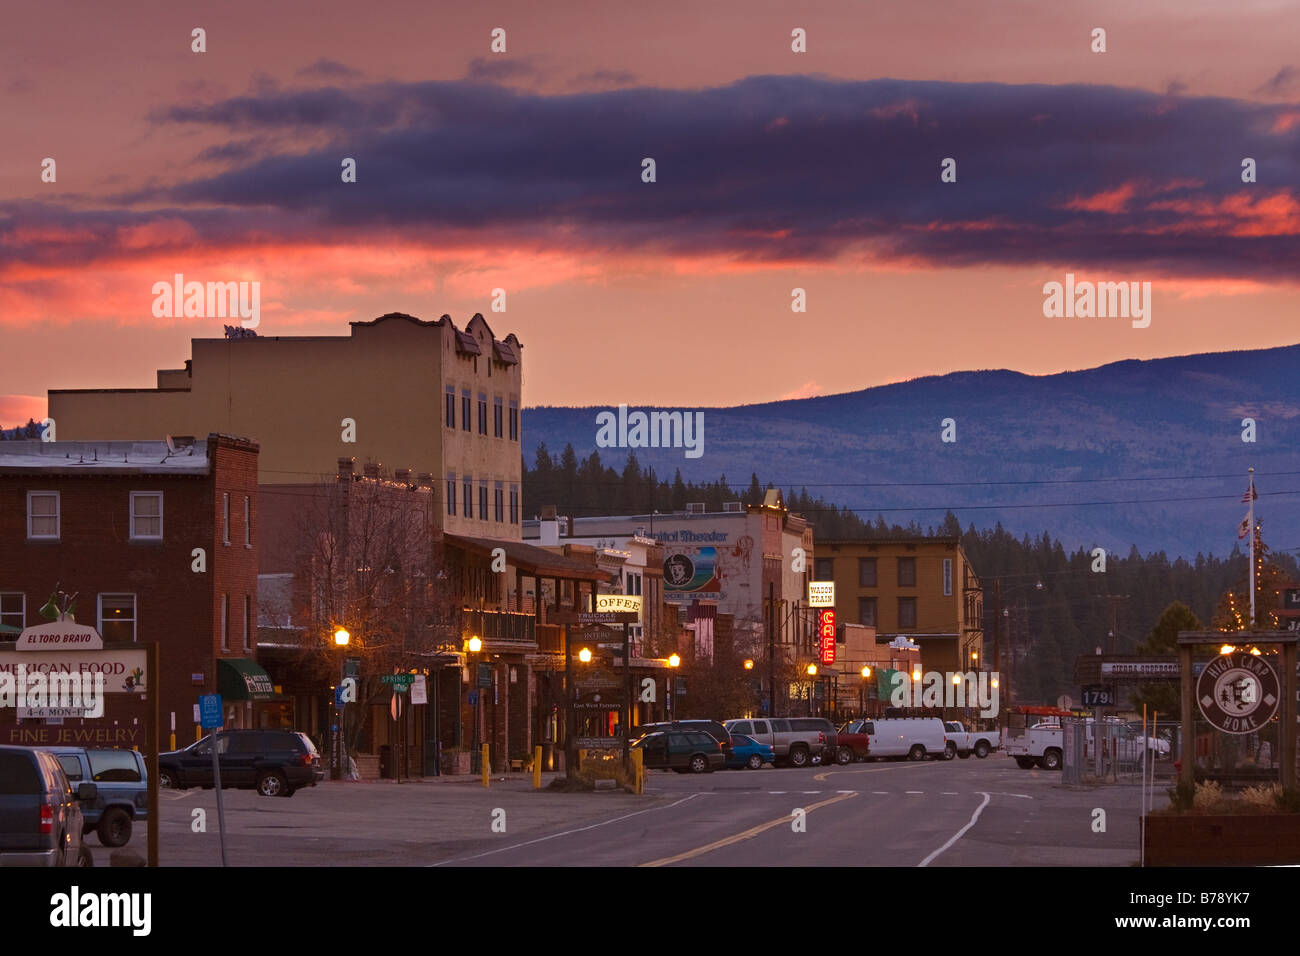 The town of Truckee California at sunrise Stock Photo